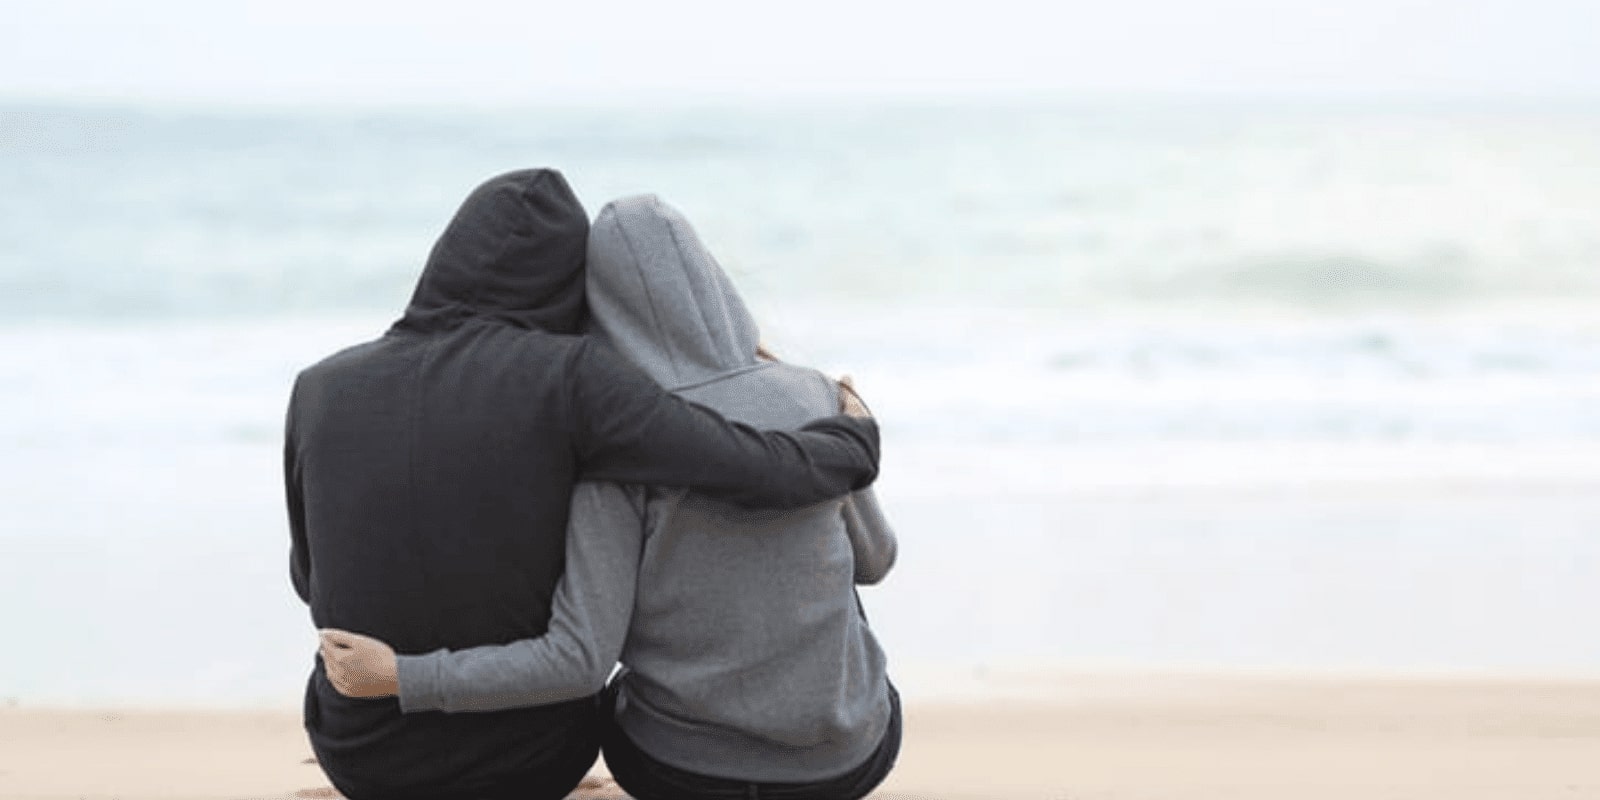 Couples wearing hoodies hugging each other on a beach